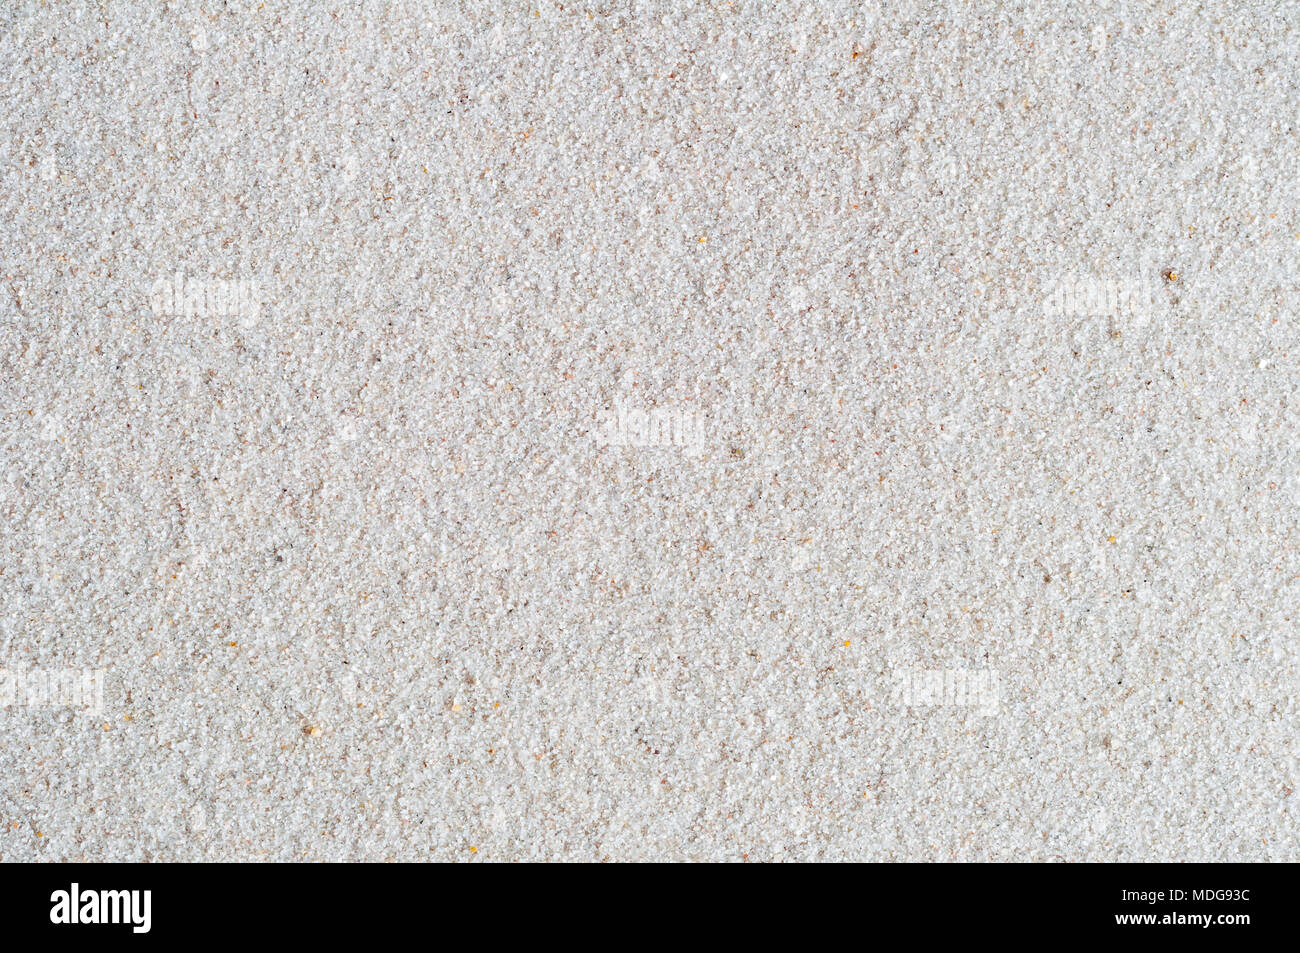 Close up background shot of white sand. Gritty texture. Stock Photo